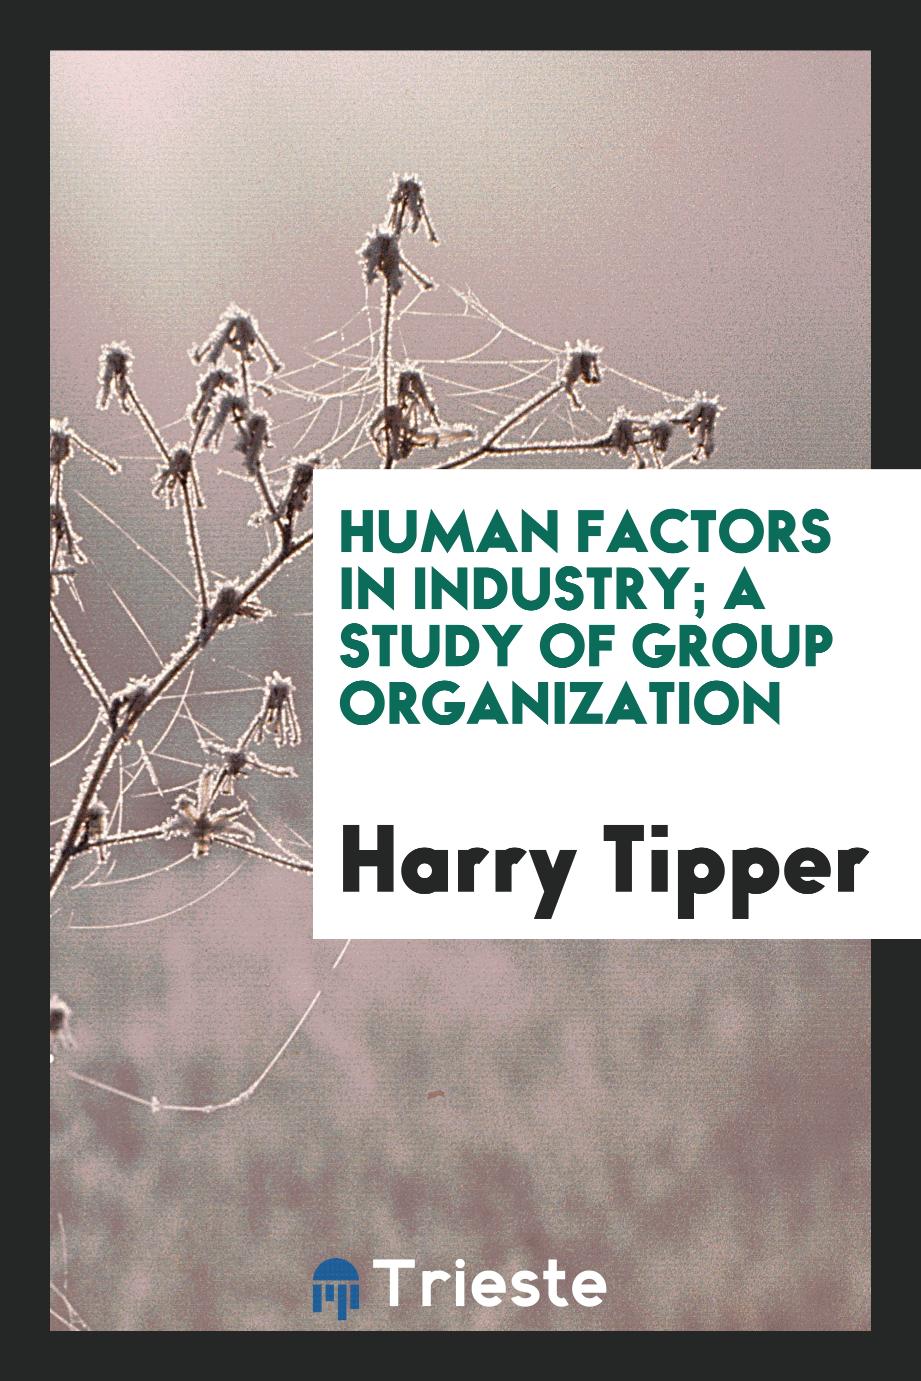 Human factors in industry; a study of group organization